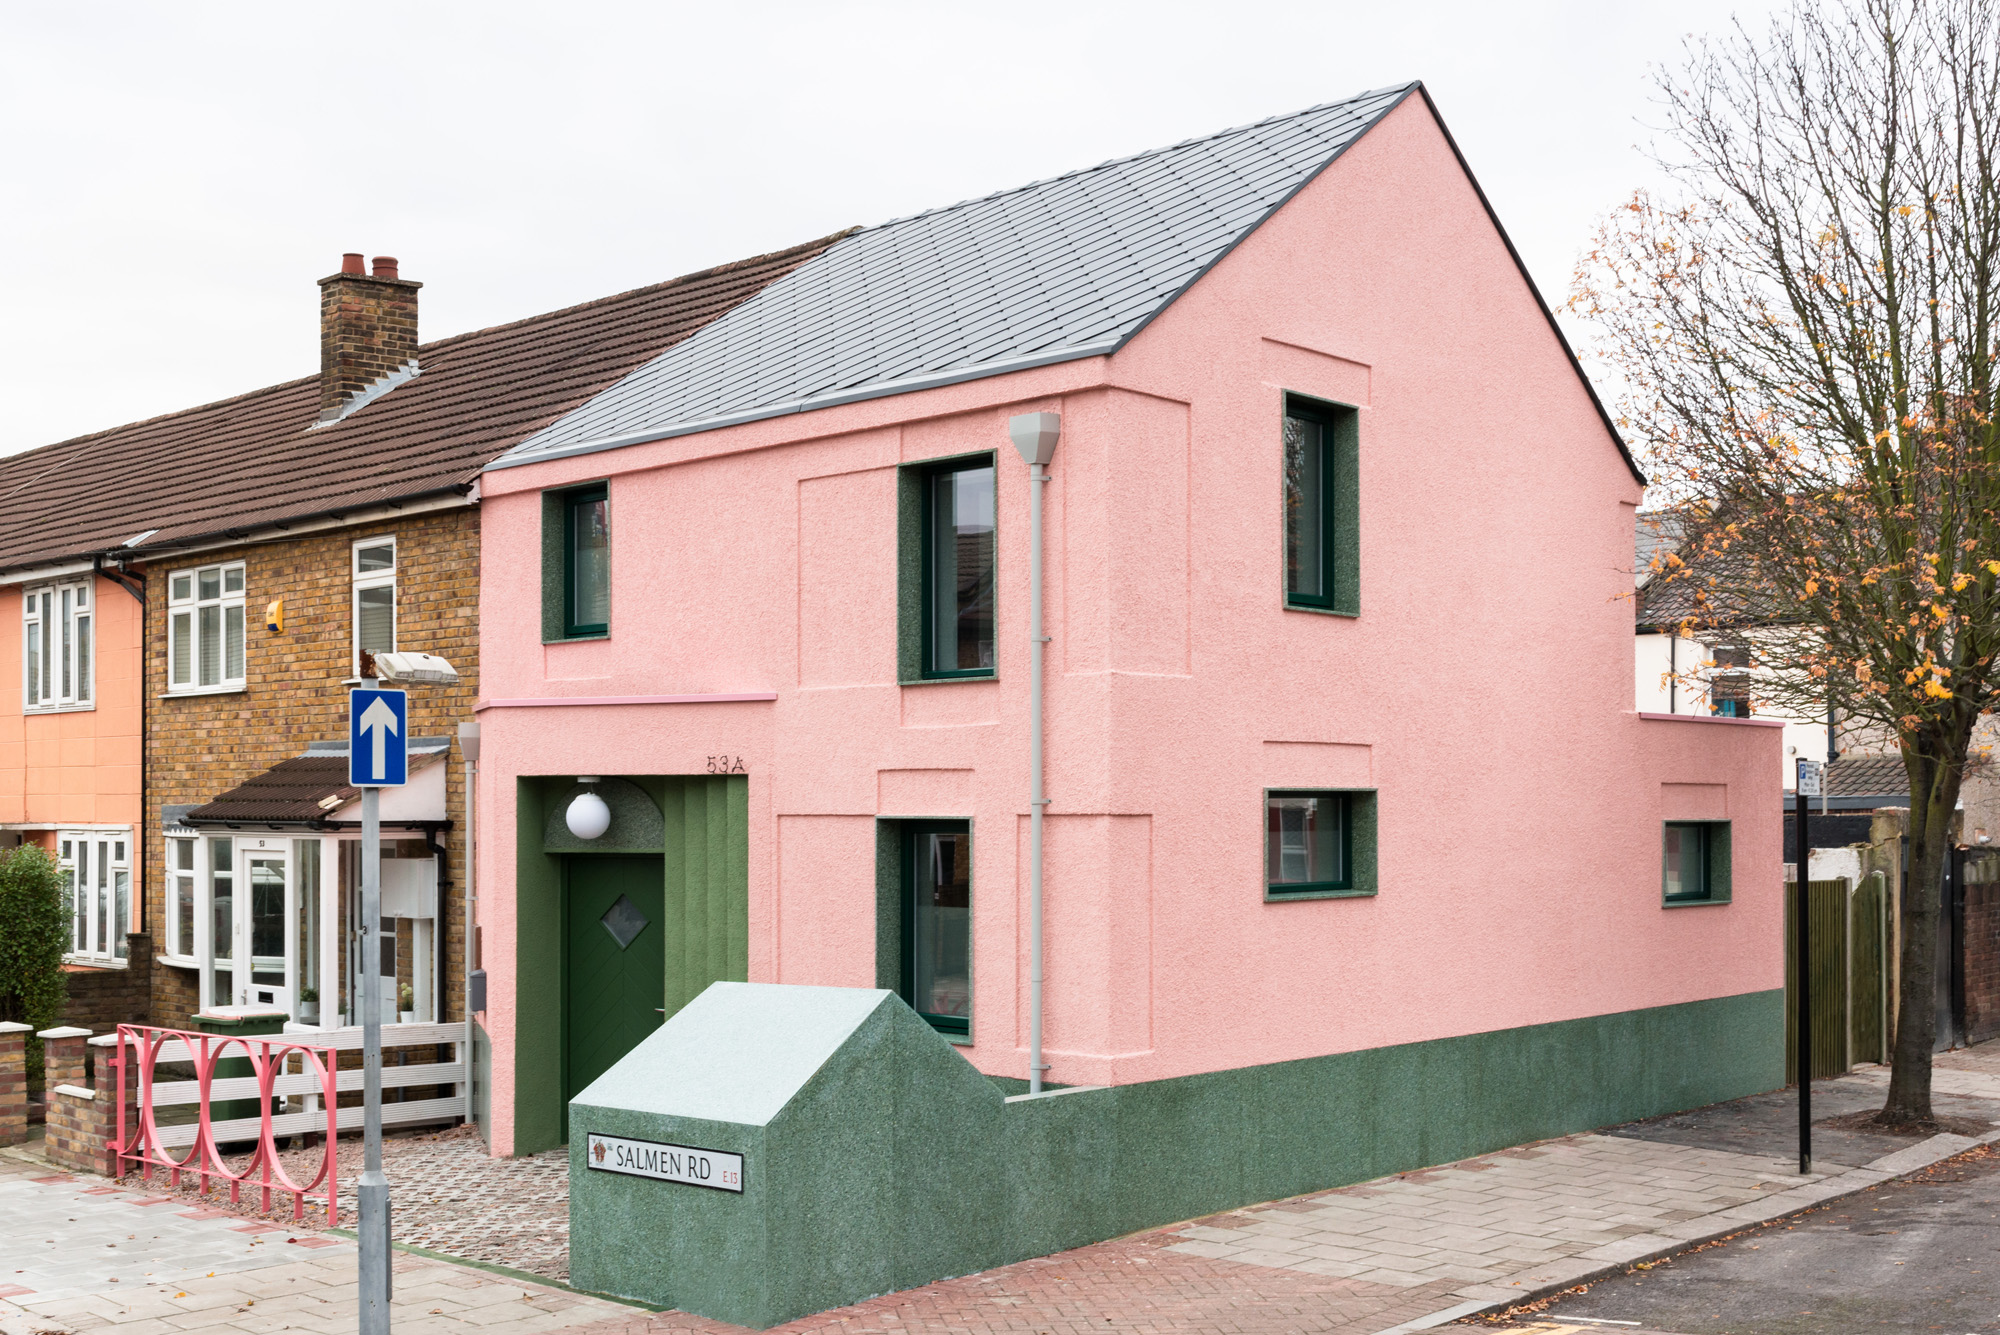 Pink and green house by Office S&amp;M - modern architecture and interior design studio in London